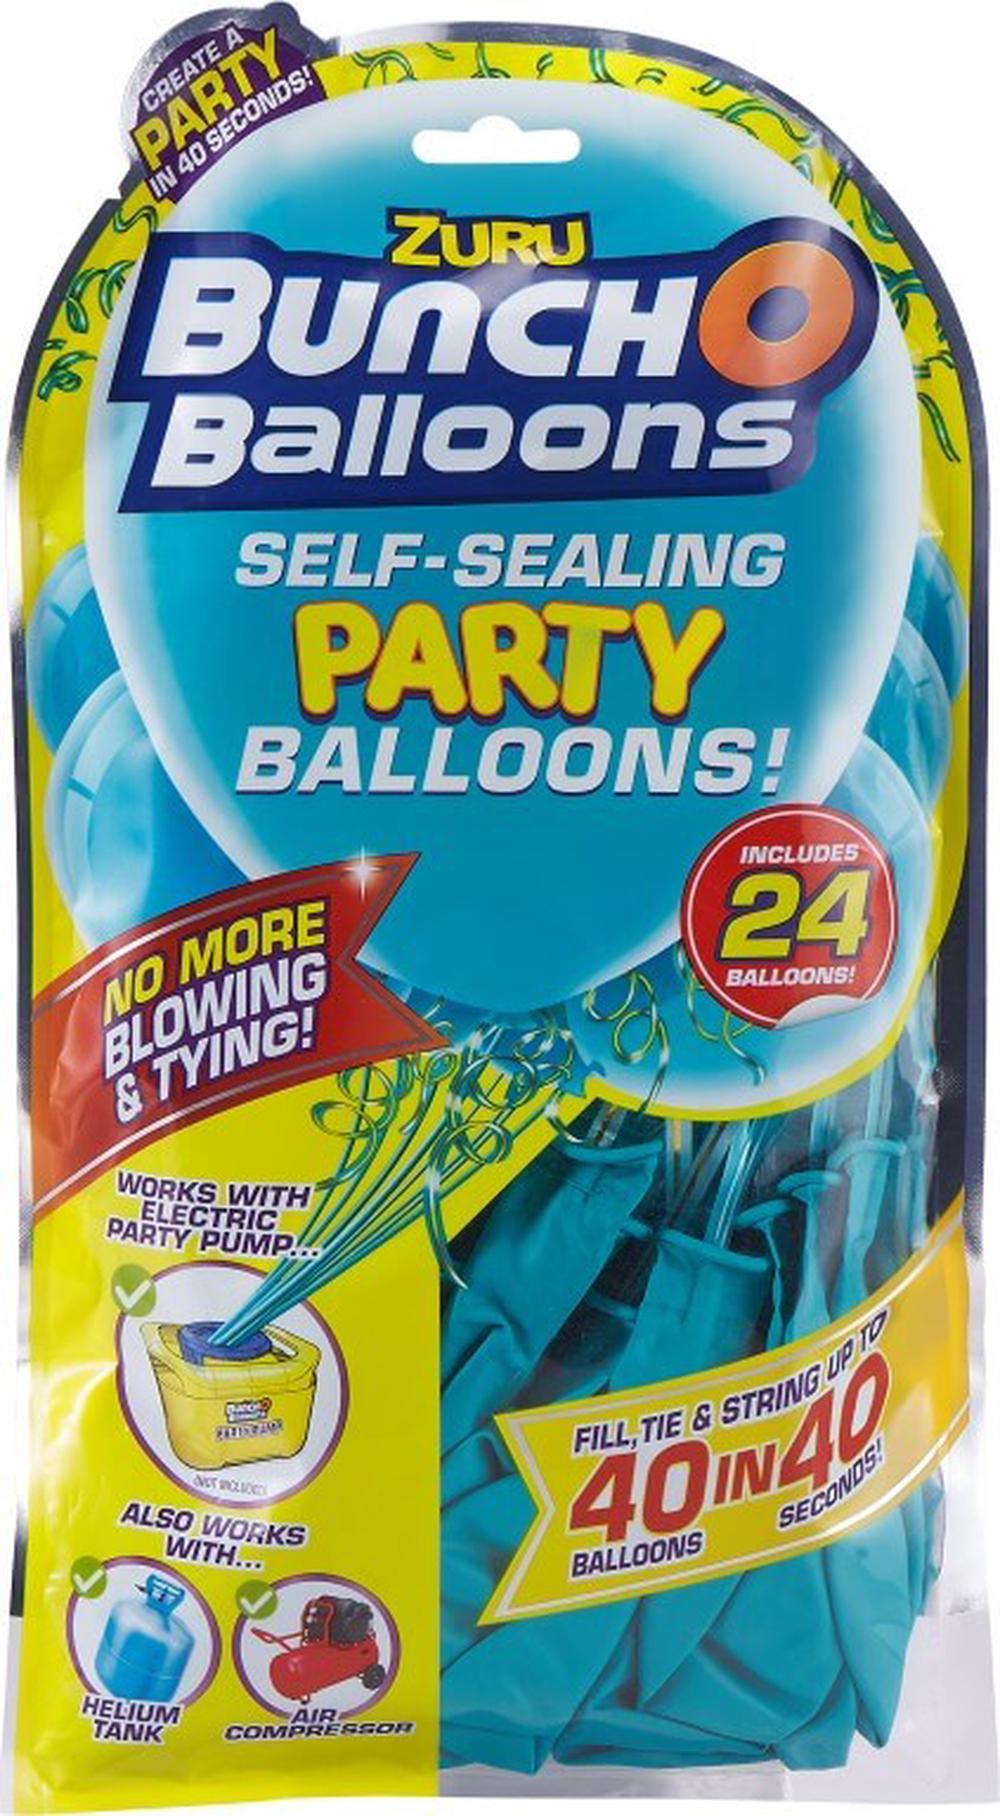 Bunch O Balloons Self Sealing Party Balloons Refill 24 Pack Teal